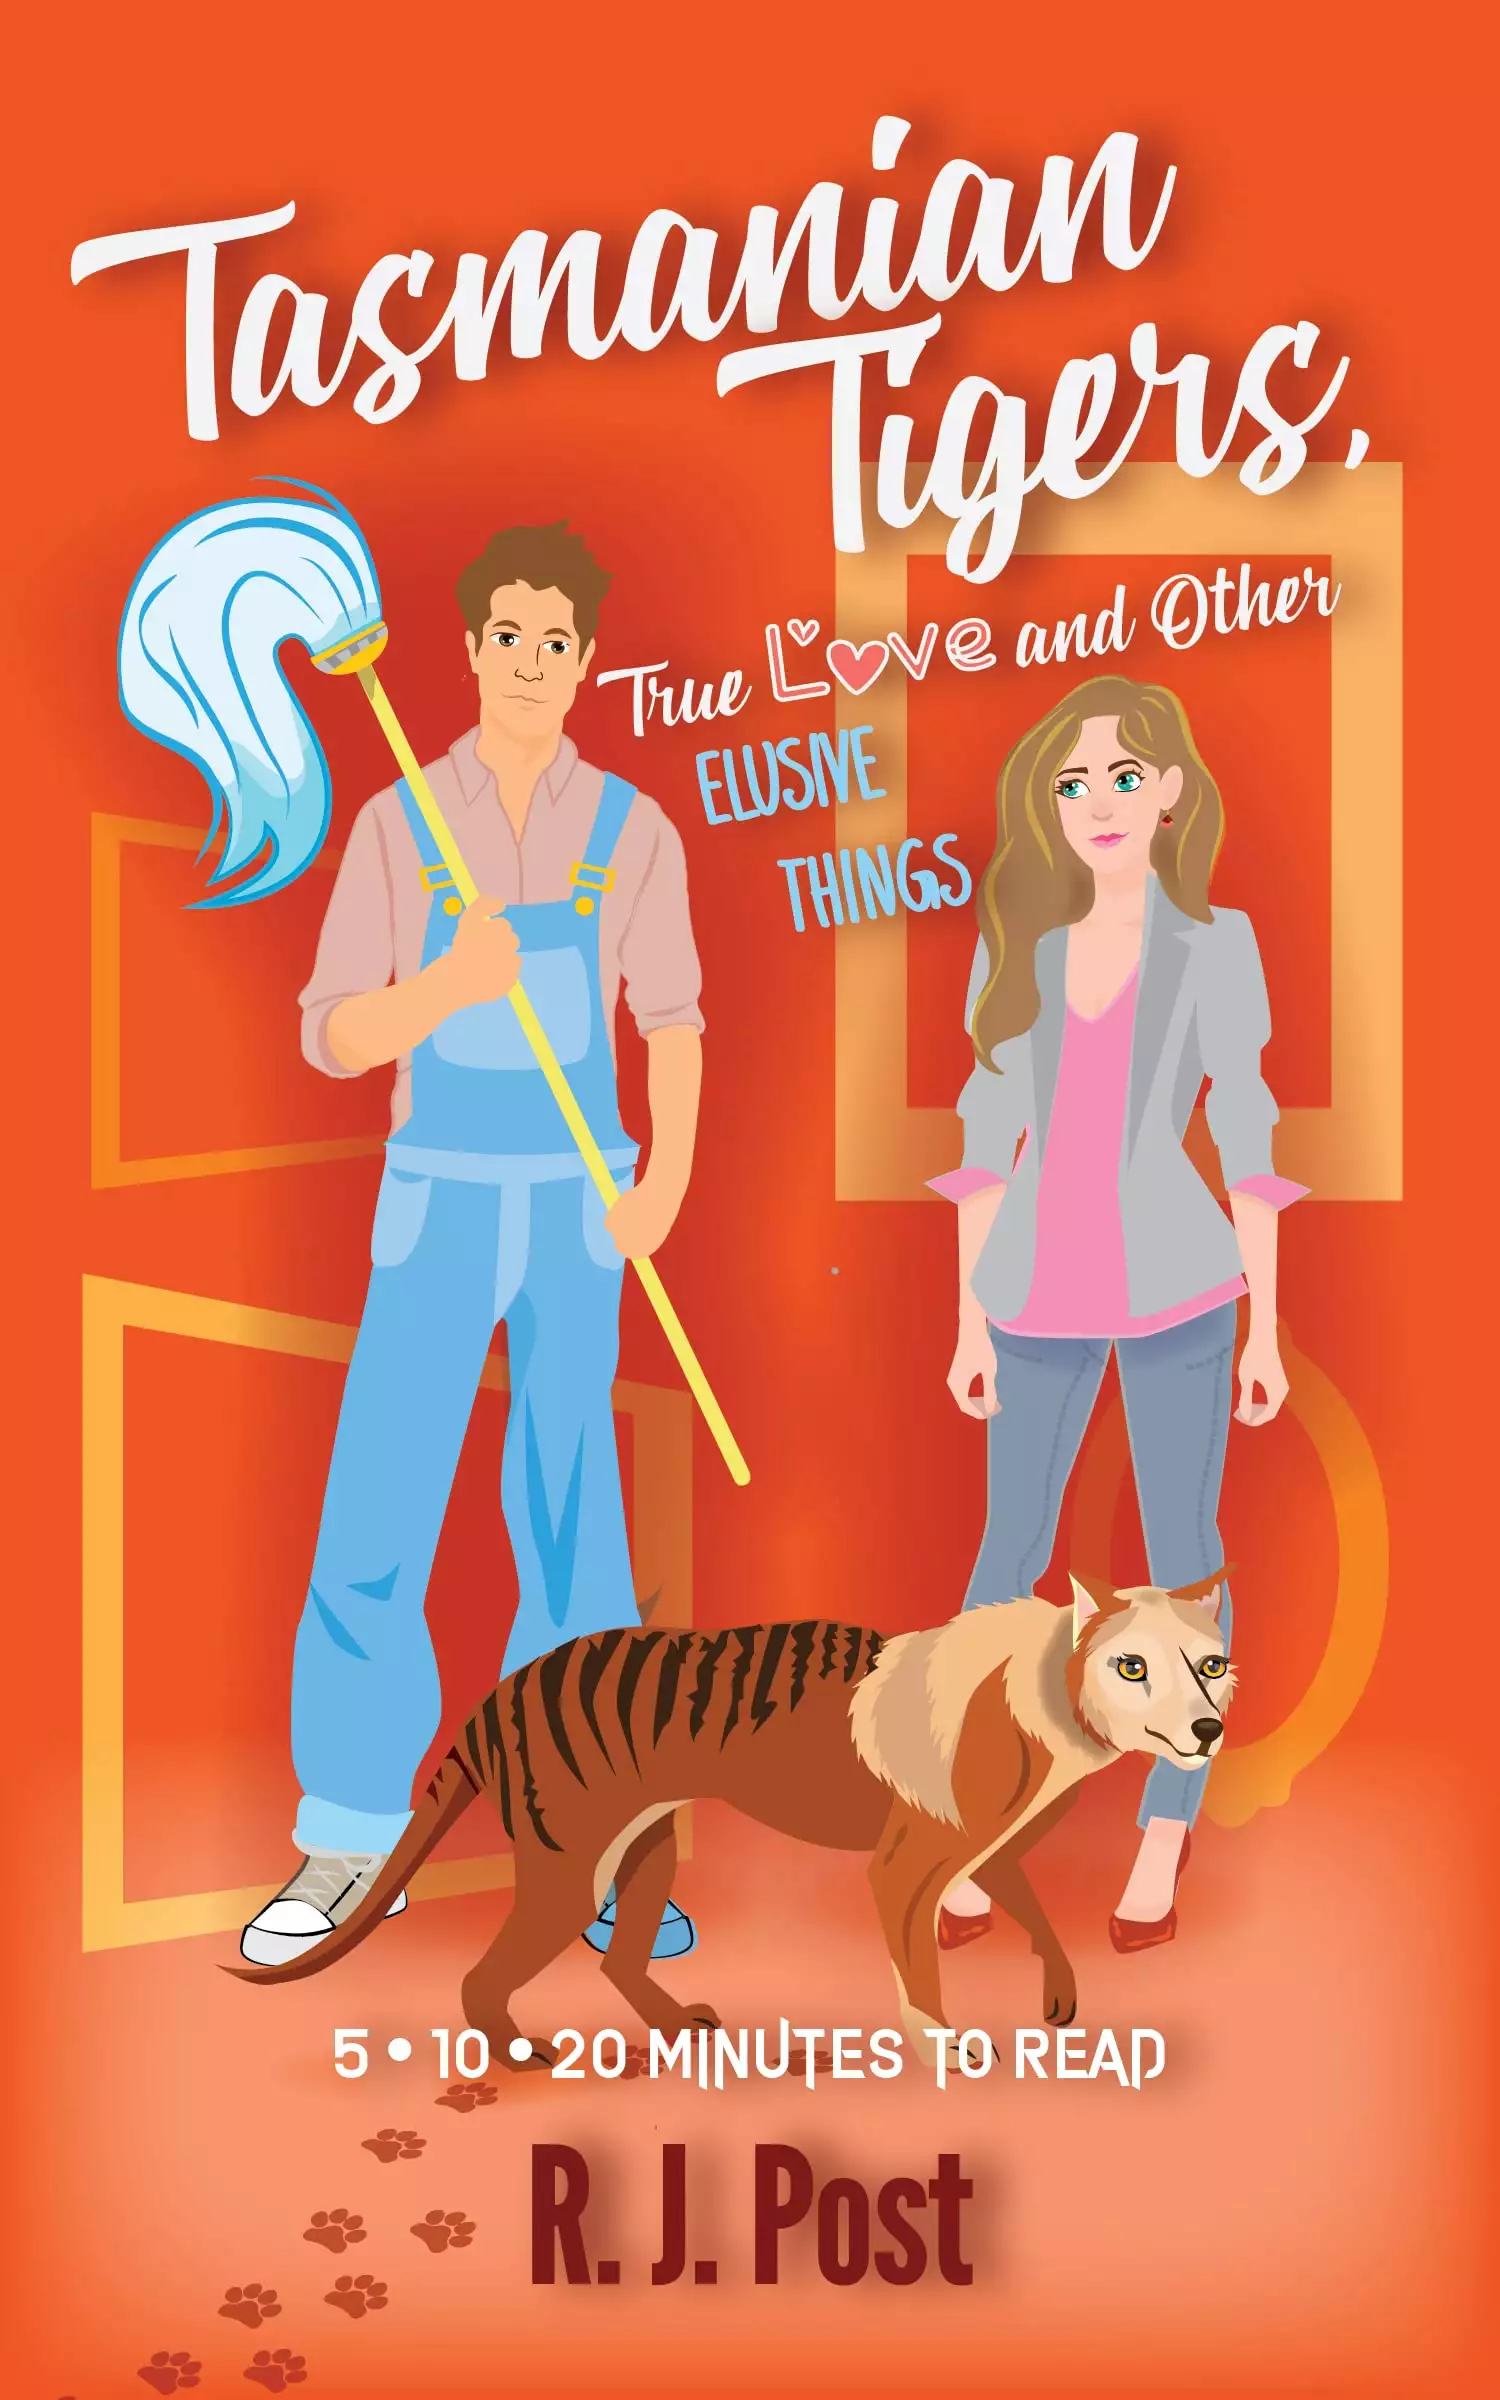 Tasmanian Tigers, True Love and Other Elusive Things: 5•10•20 Minutes to Read